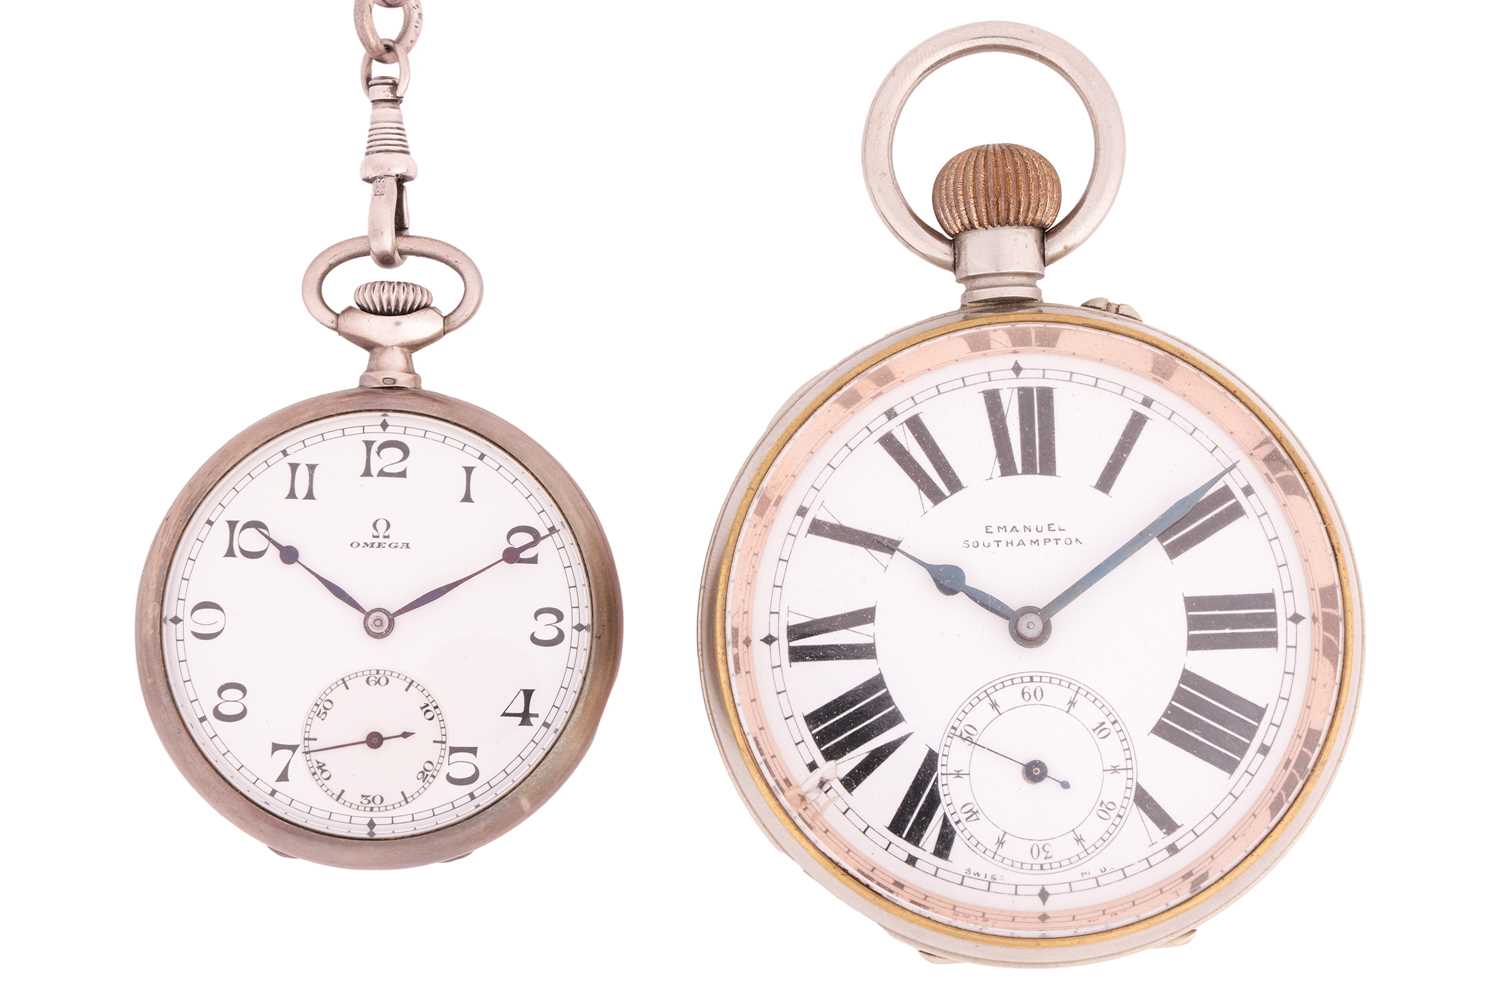 A silver pocket watch by Omega and a Goliath Emanual Southampton pocket watch.Featuring an Omega ope